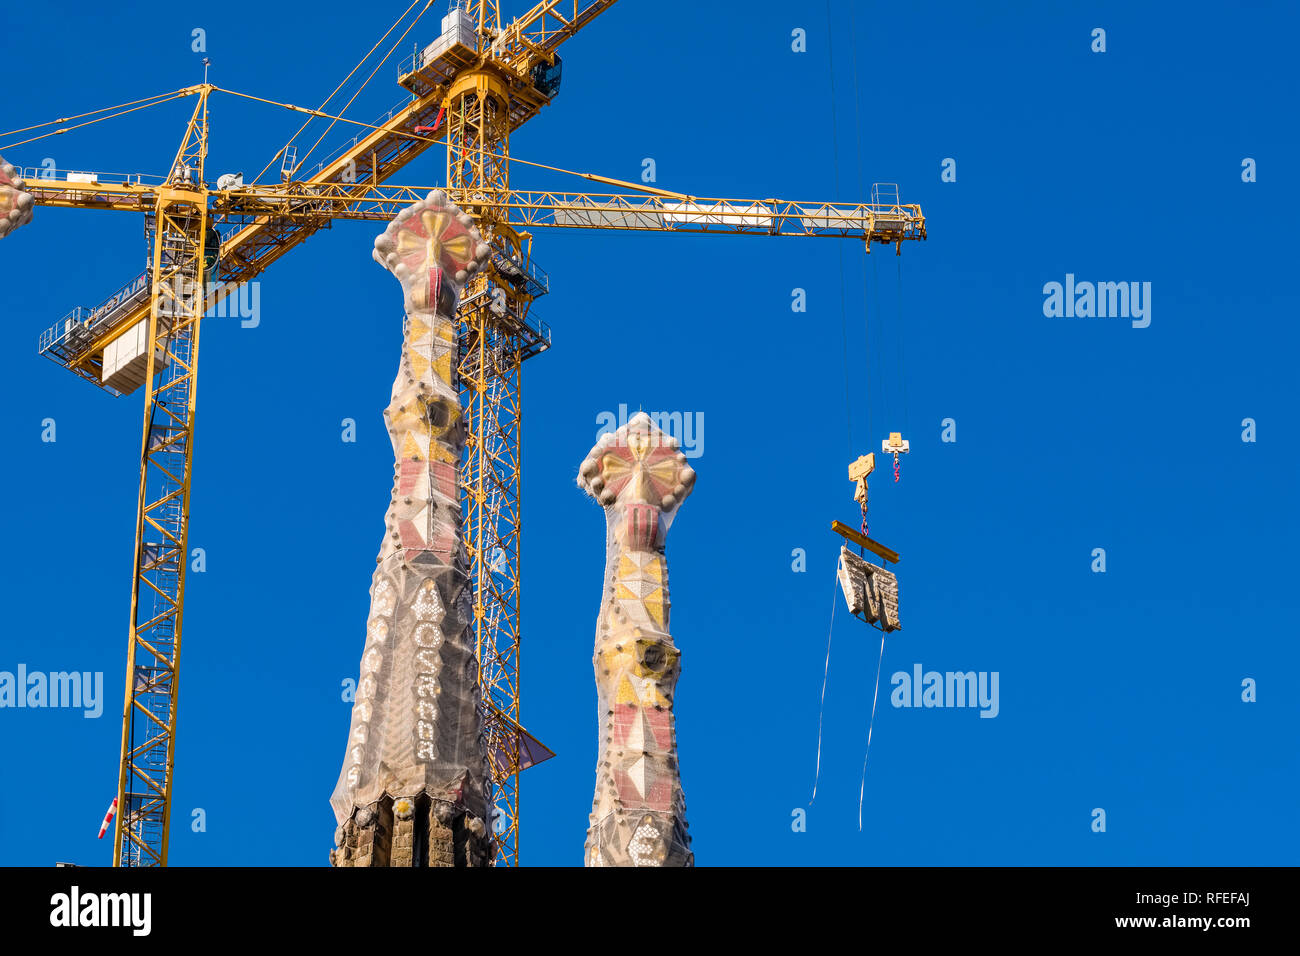 Work in progress at the church Sagrada Familia, Antoni Gaudis most famous work, still under construction and planned to be completed in 2026 Stock Photo